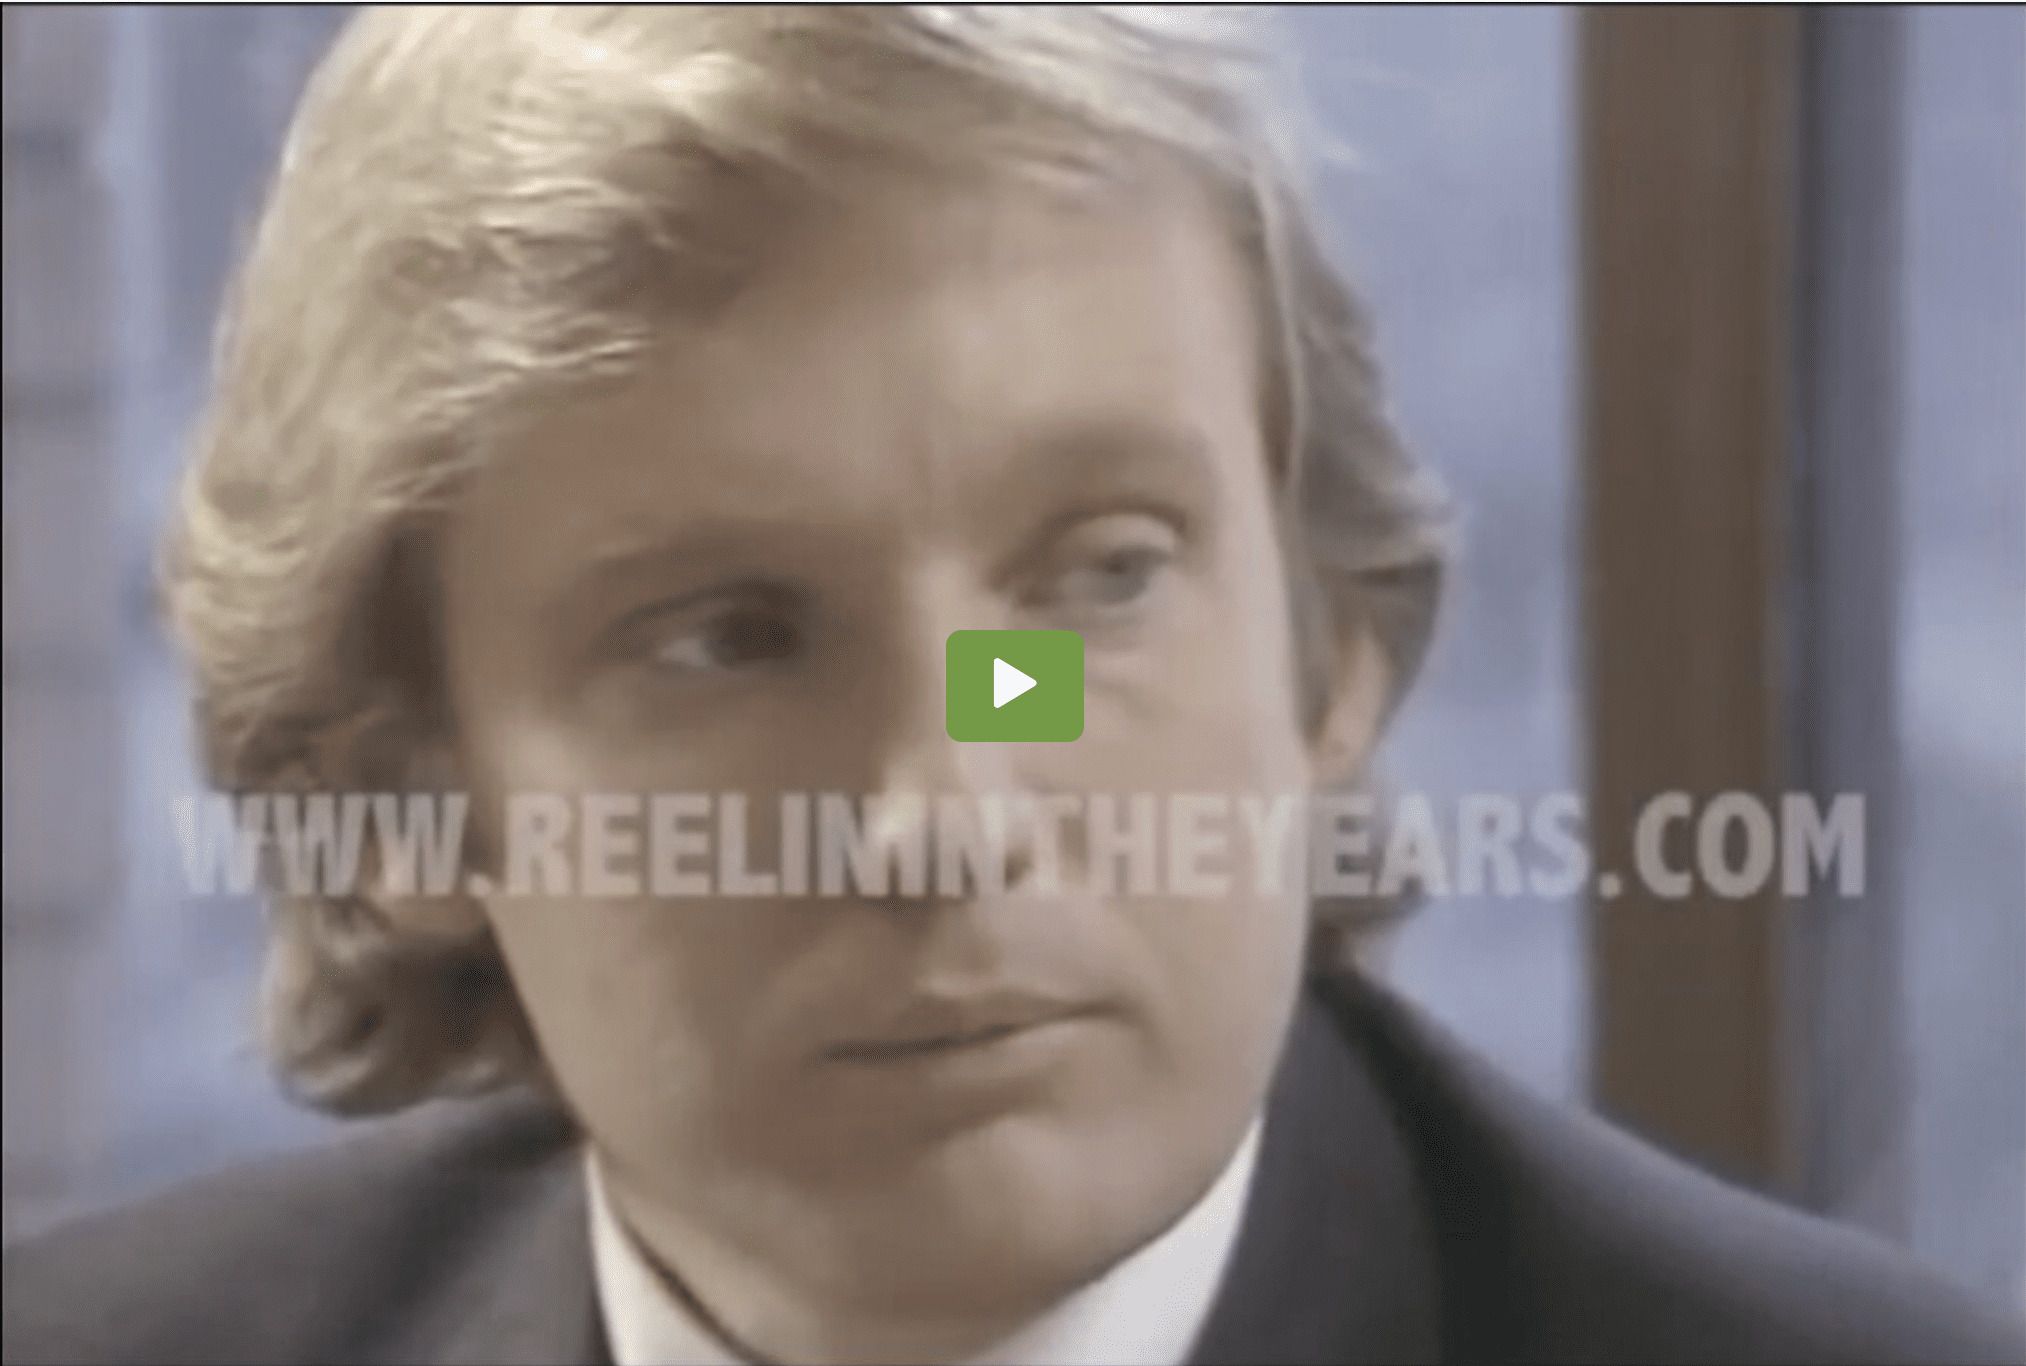 Donald Trump In 1980: "Because I Think It's A Very Mean Life" | WLT Report